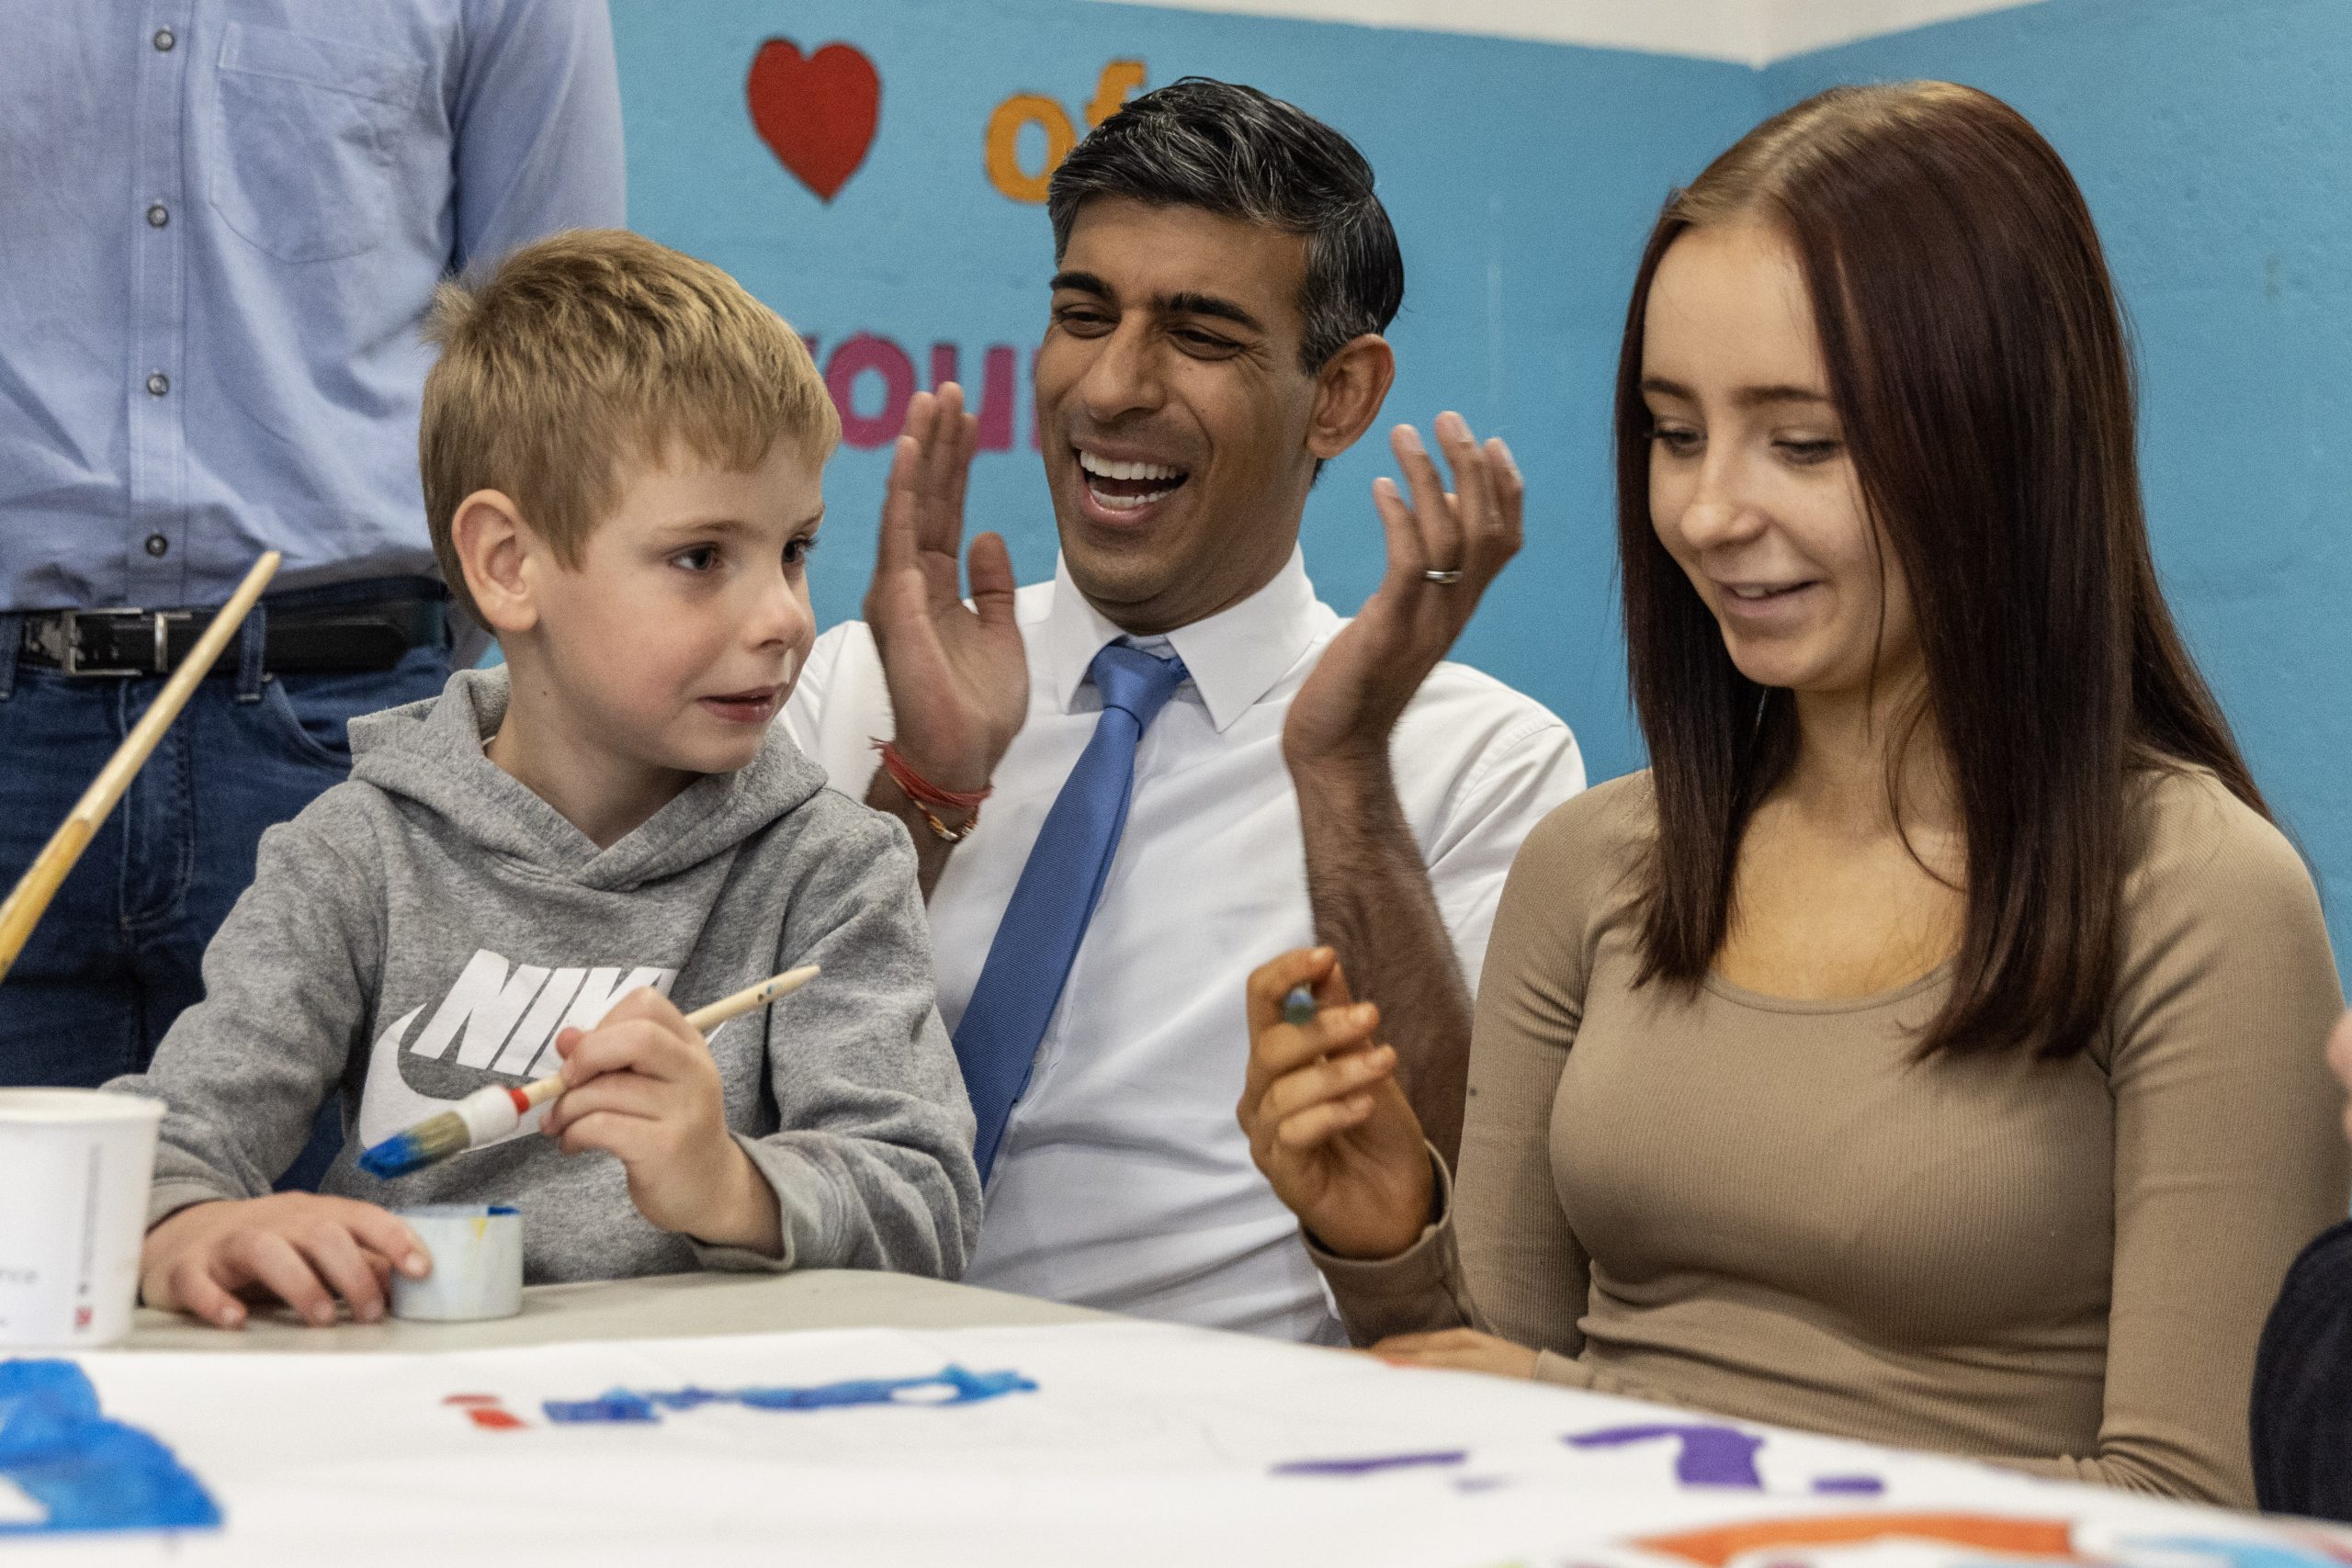 Rishi Sunak swaps pressures of high office and Tory faithful for a game of table football